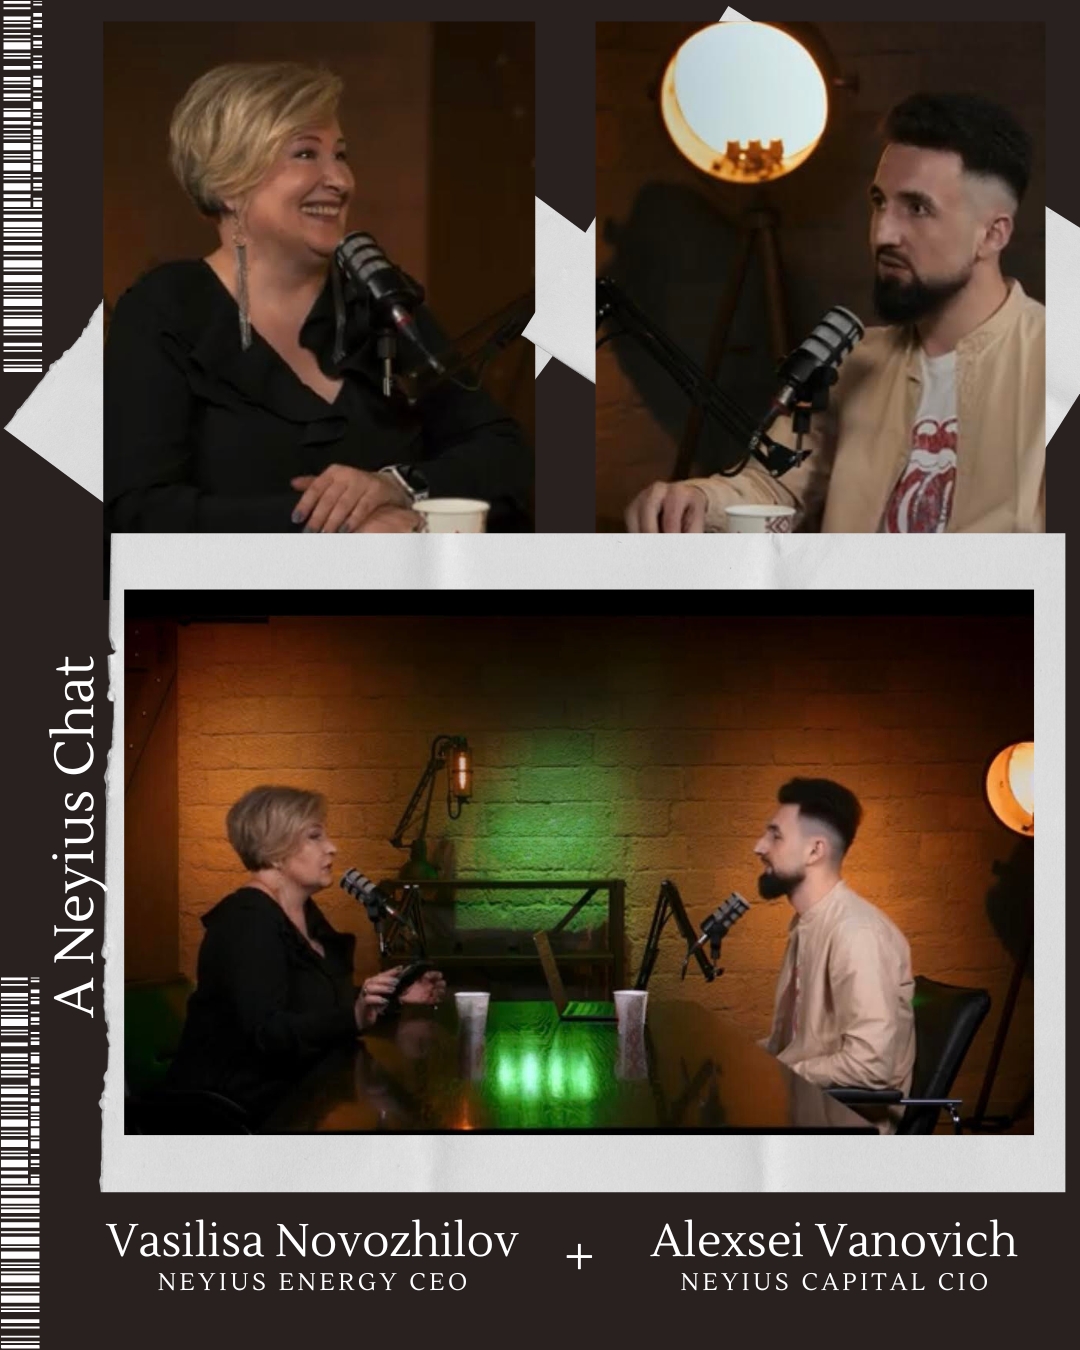 Vasilisa Novozhilov, the CEO of Neyius Energy, and Alexsei Vanovich, the Chief Investment Officer for Neyius Capital, stopped by Studio 7 for their own little test run of a podcast for new hires